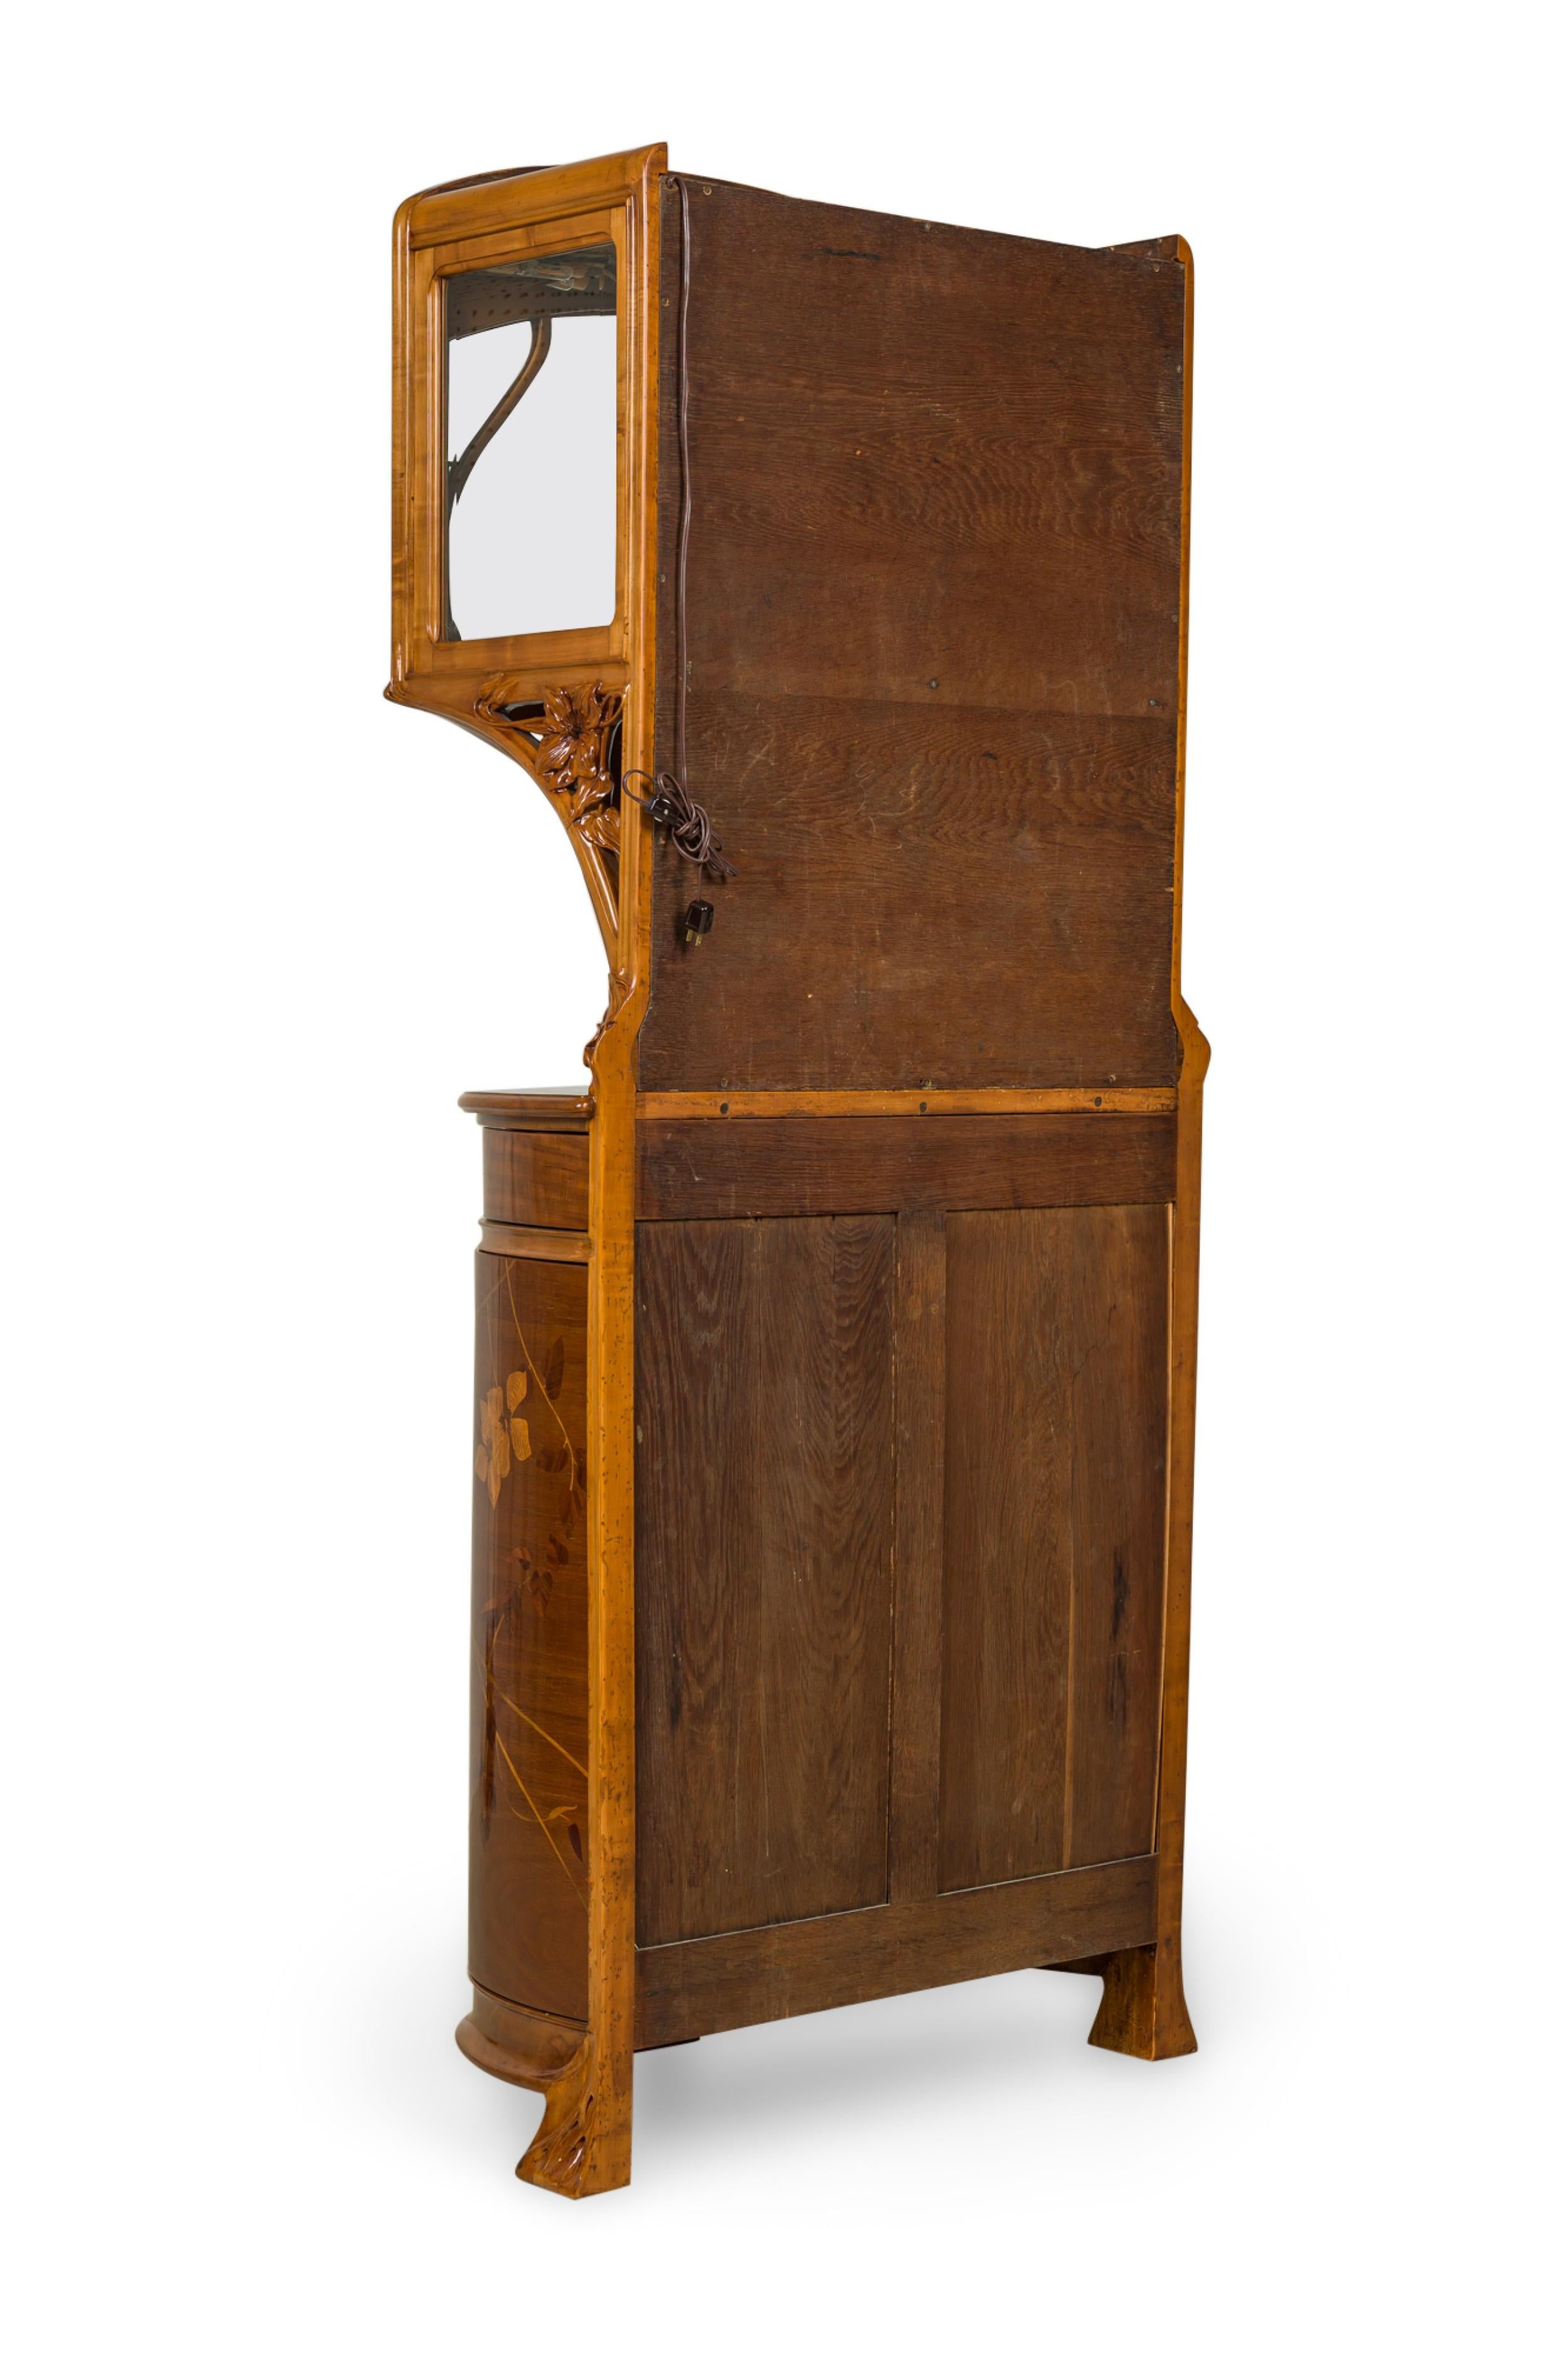 Camille Gauthier French Art Nouveau Floral Marquetry Display Cabinet / Vitrine In Good Condition For Sale In New York, NY